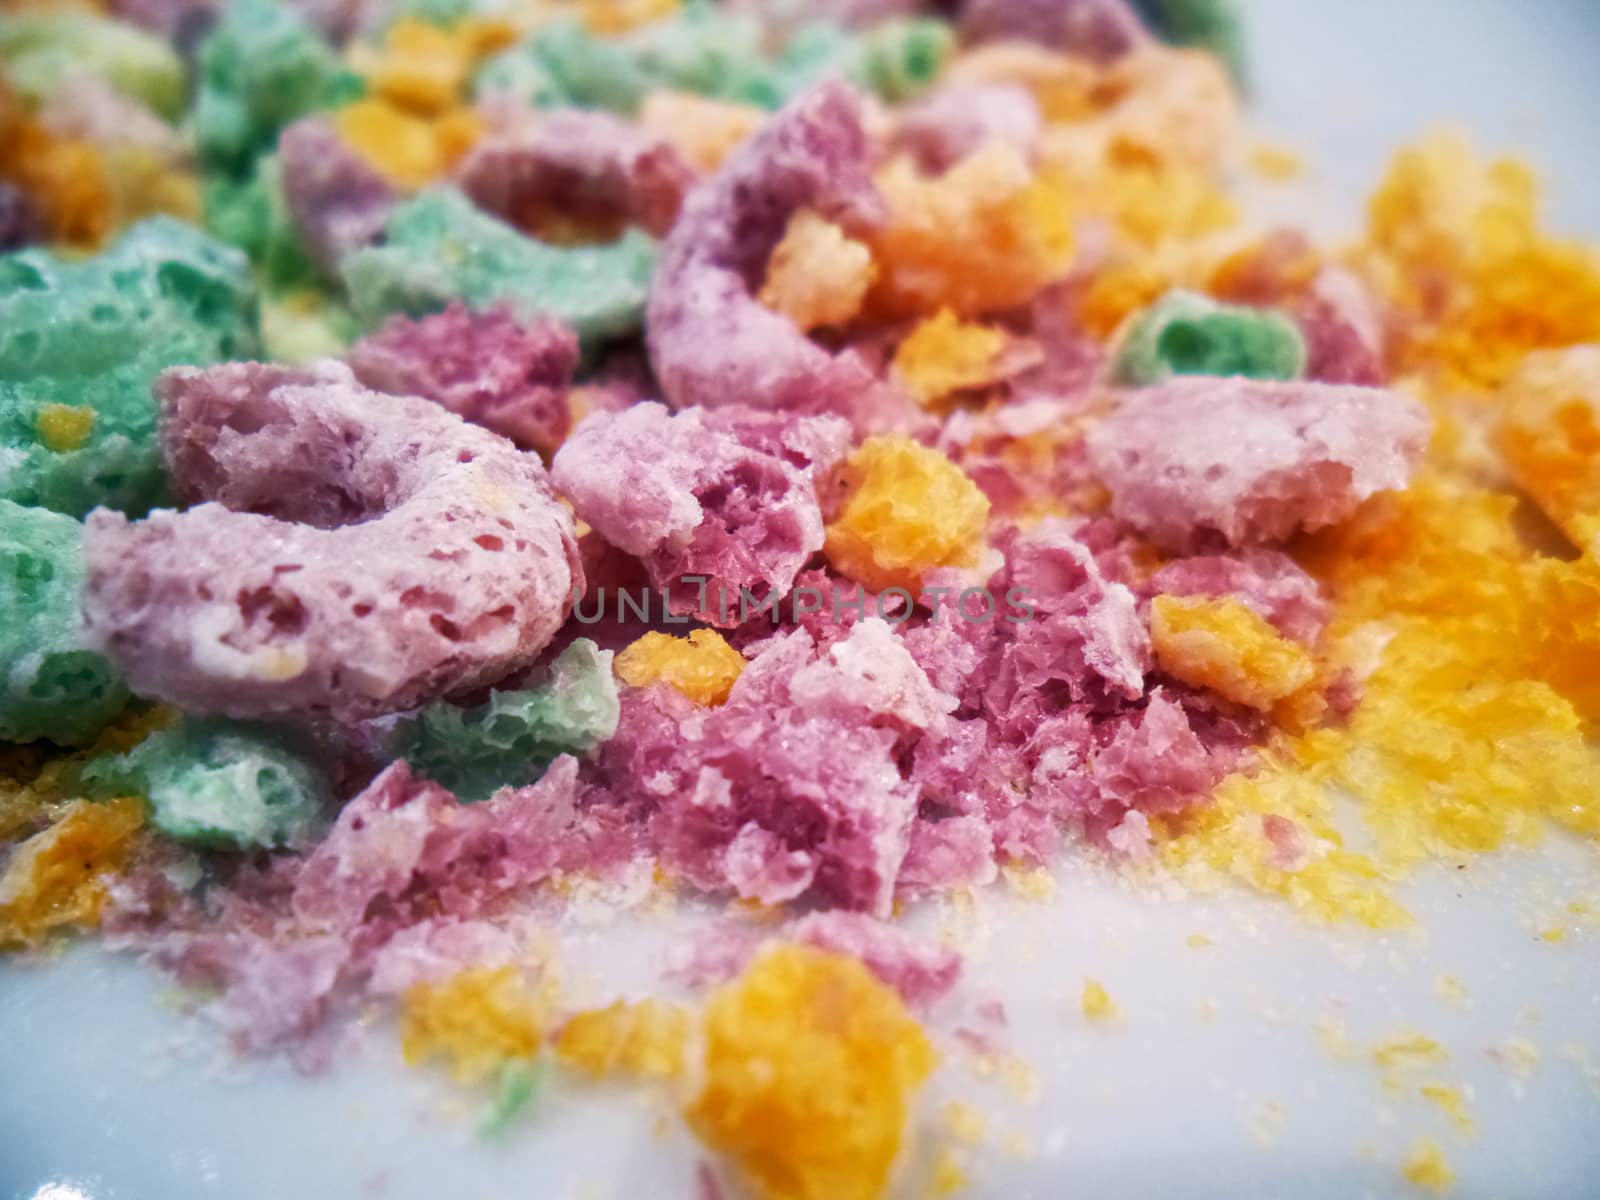 Crushed colorful cereal on white surface by stockbp